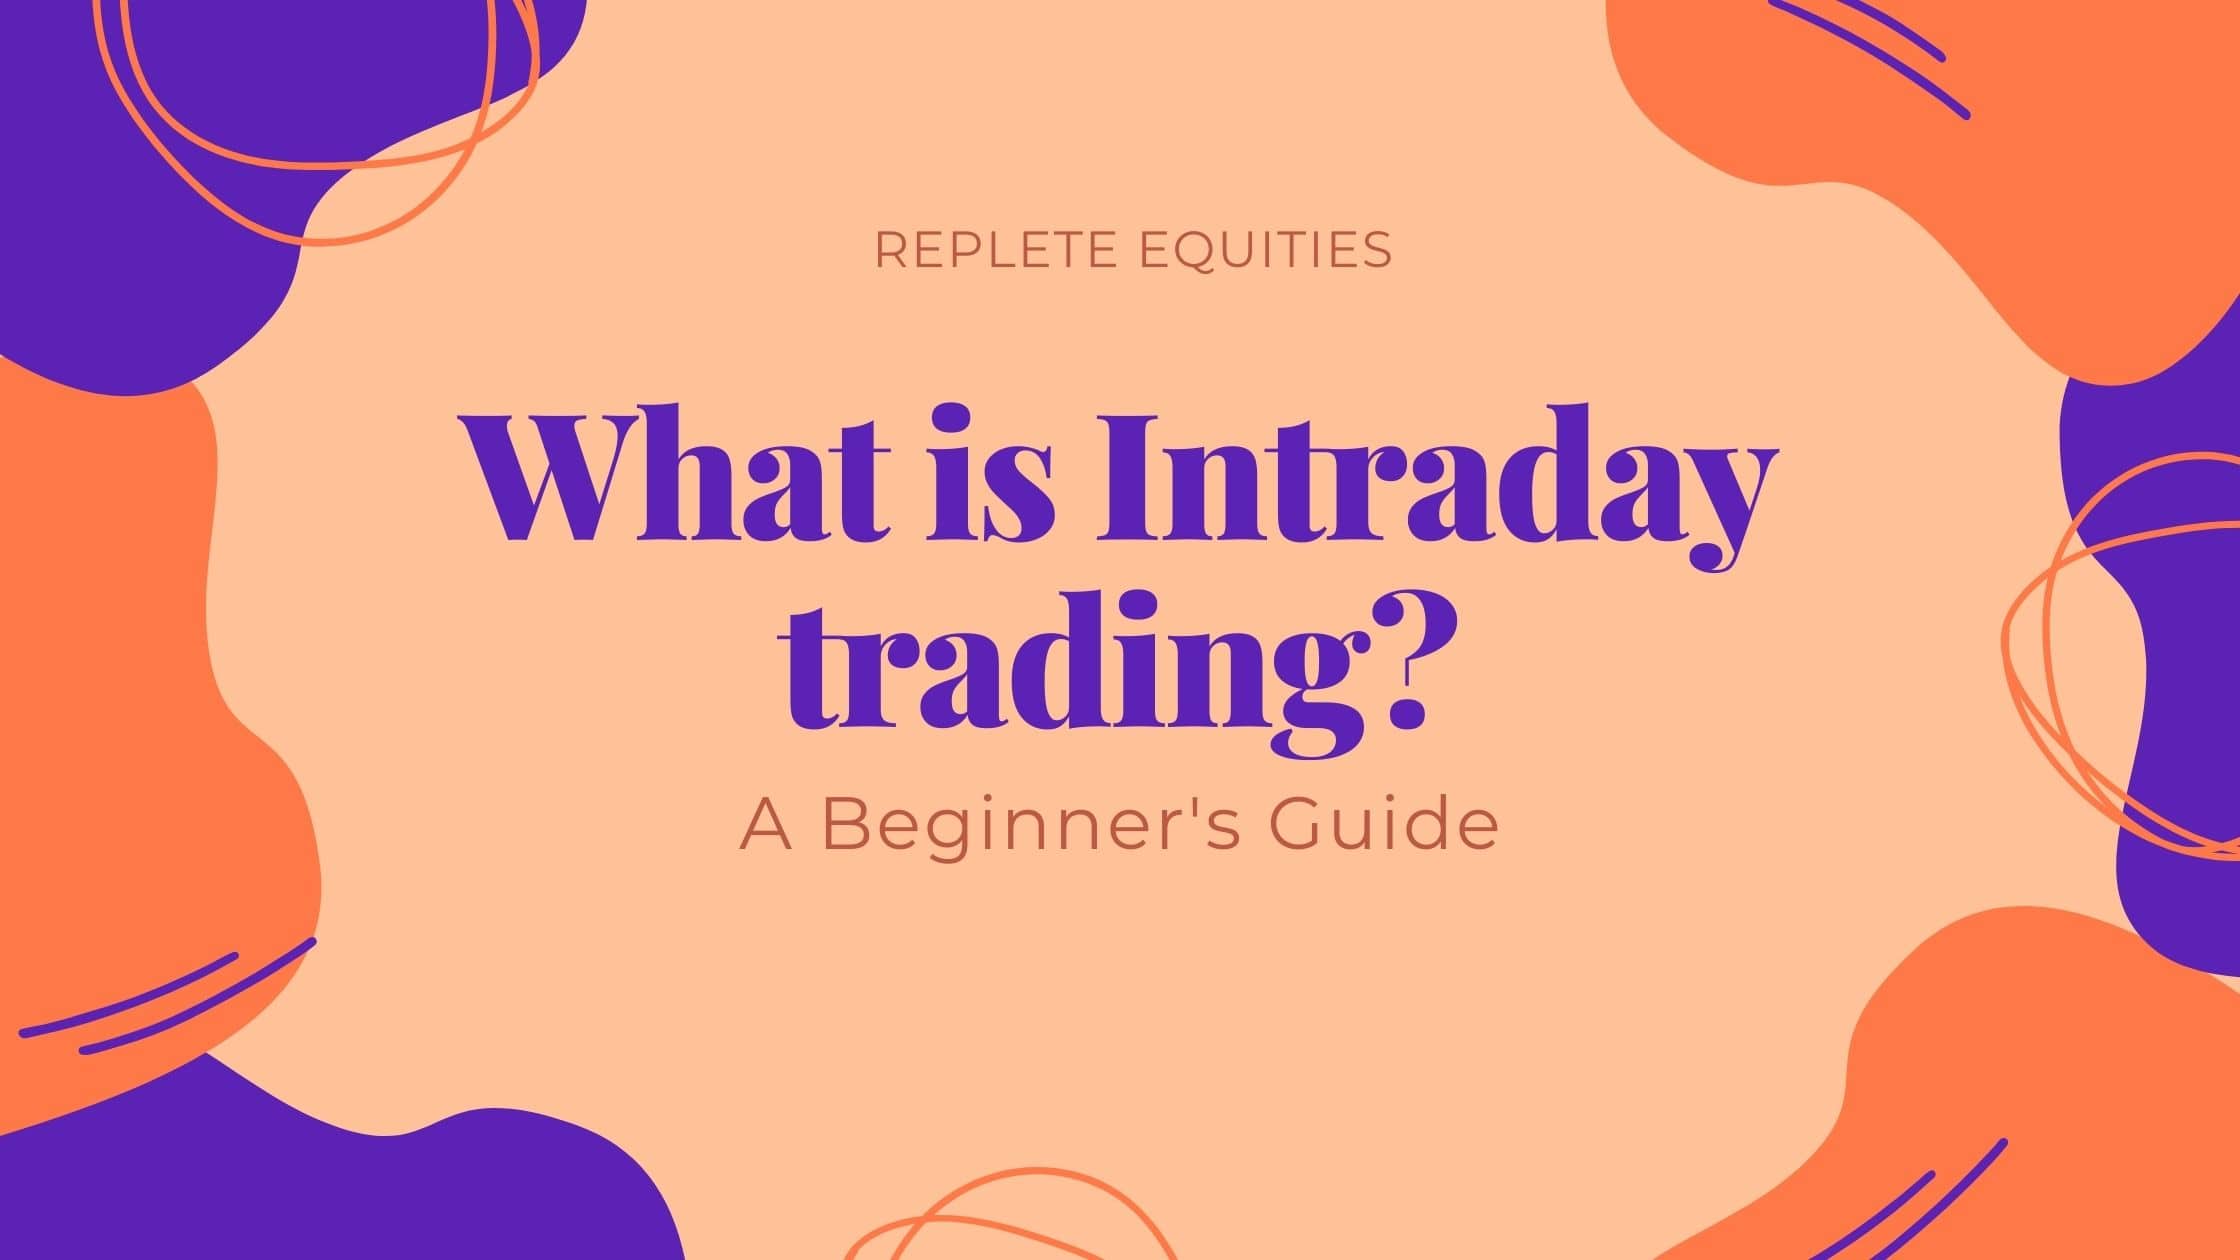 What is Intraday Trading? The best guide for beginners in 2023